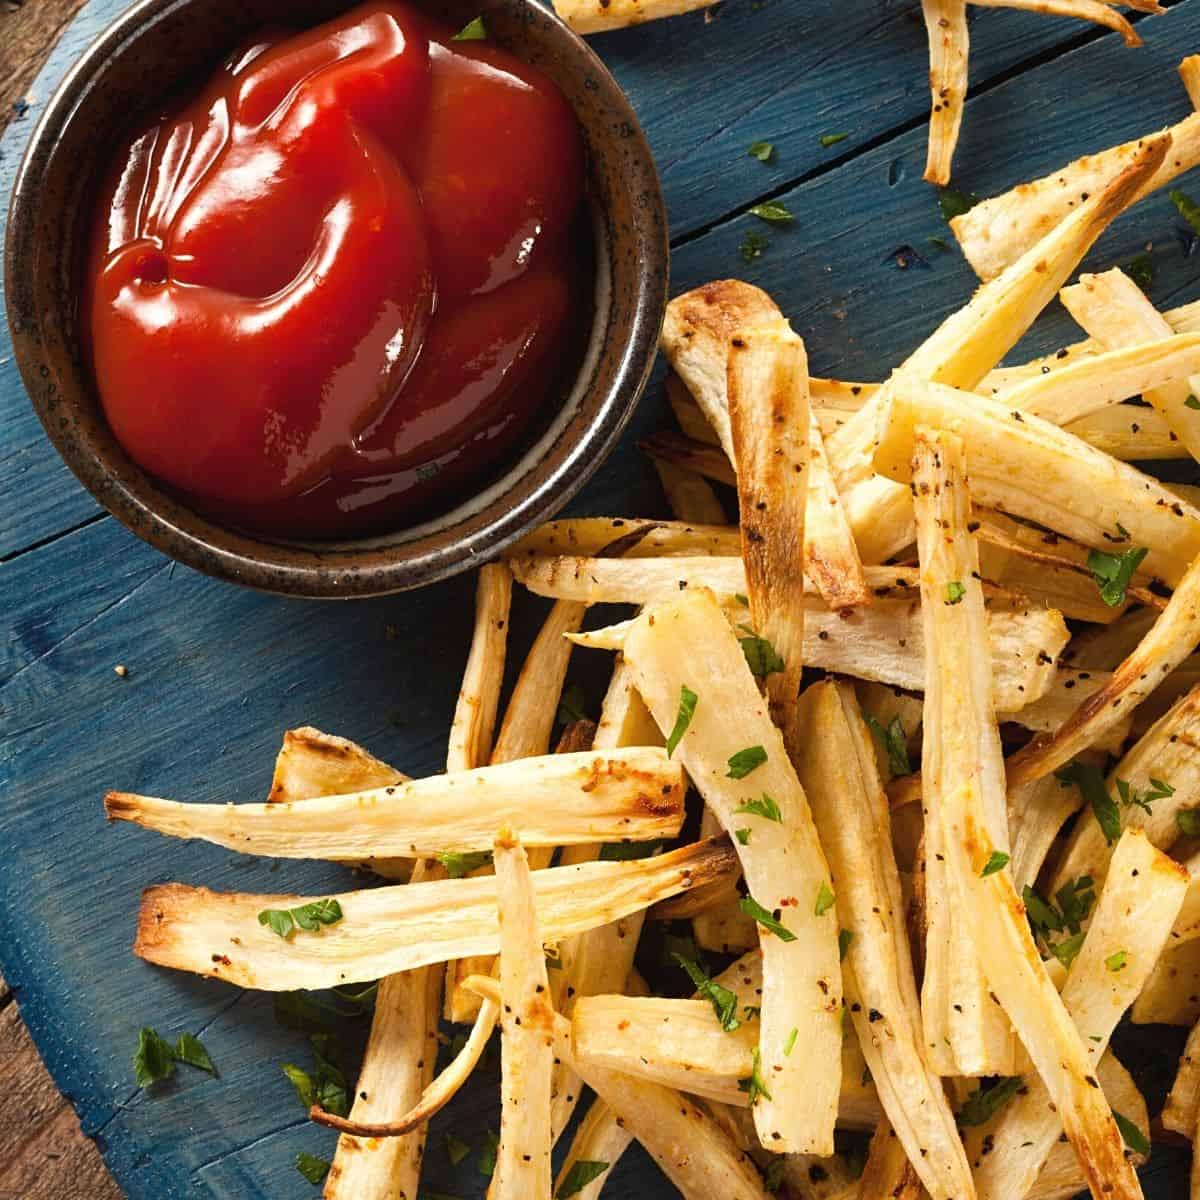 parsnip fries with ketchup - Are Parsnips Keto? How to eat them on Keto.